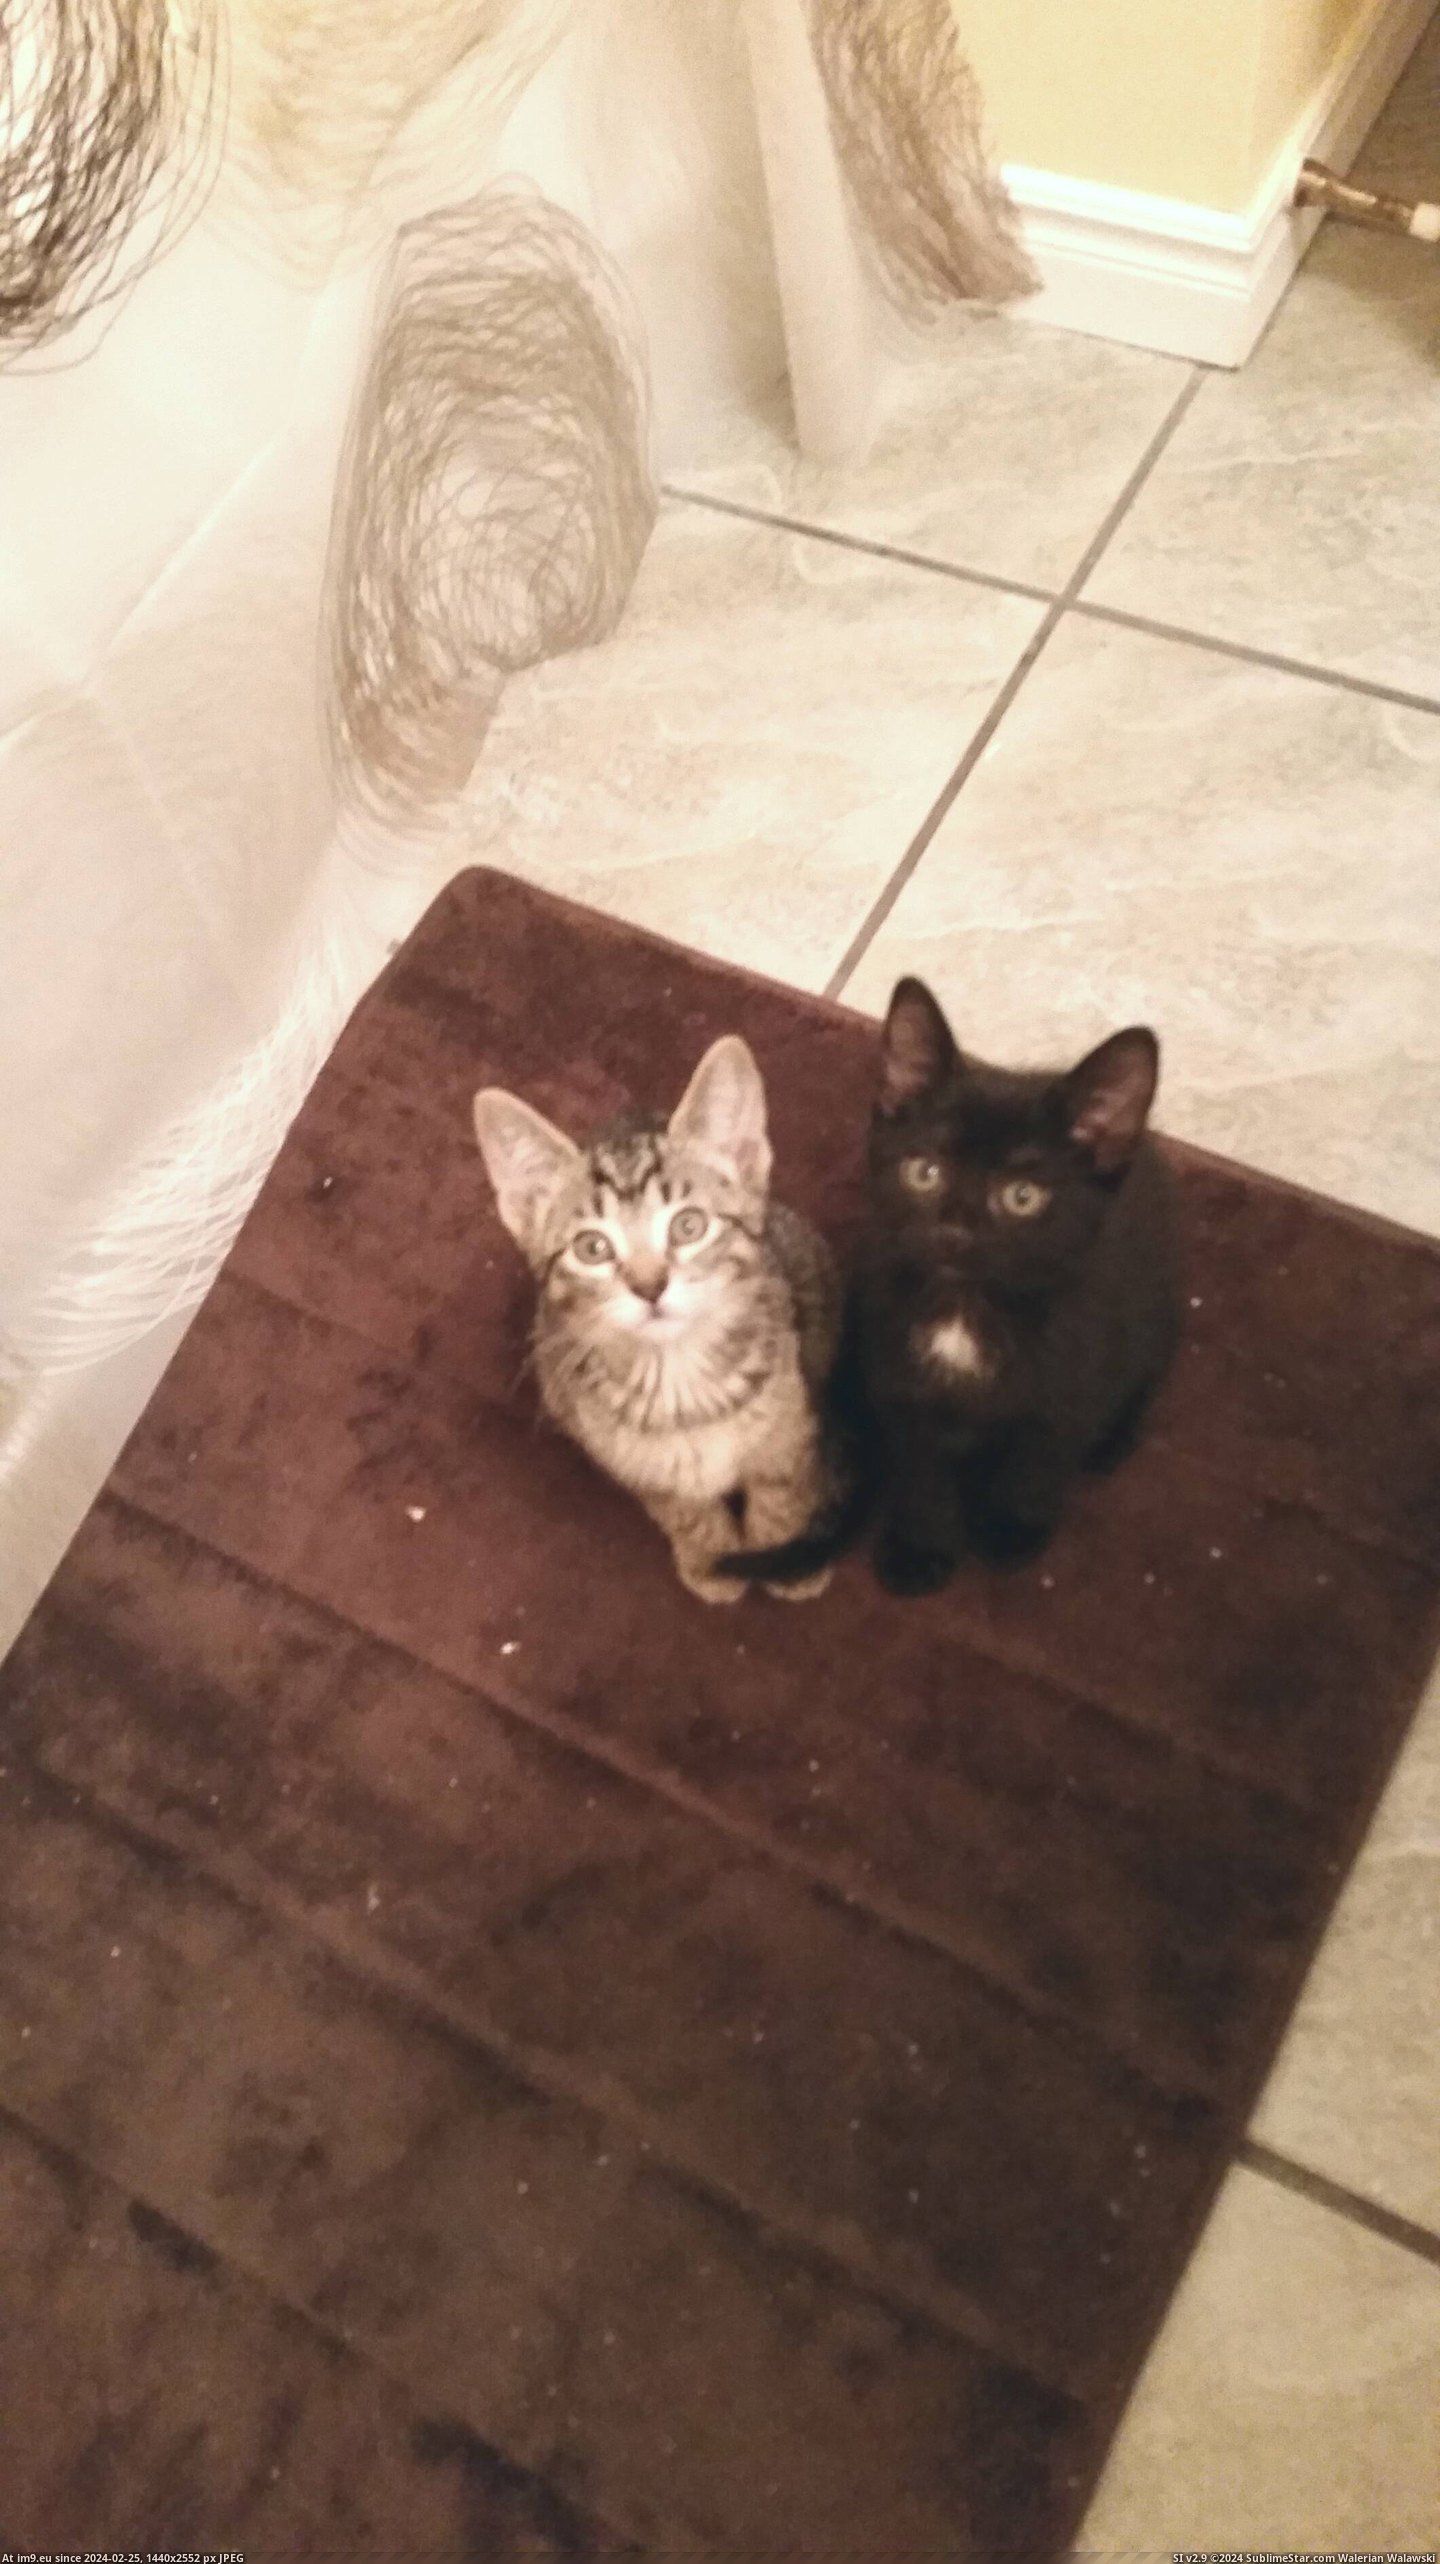 #Cats #Time #Shower #Curtain #Adopting #Pulled #Closed #Watched [Cats] First shower since adopting them yesterday. They watched me the whole time until I pulled the shower curtain closed.. the Pic. (Bild von album My r/CATS favs))